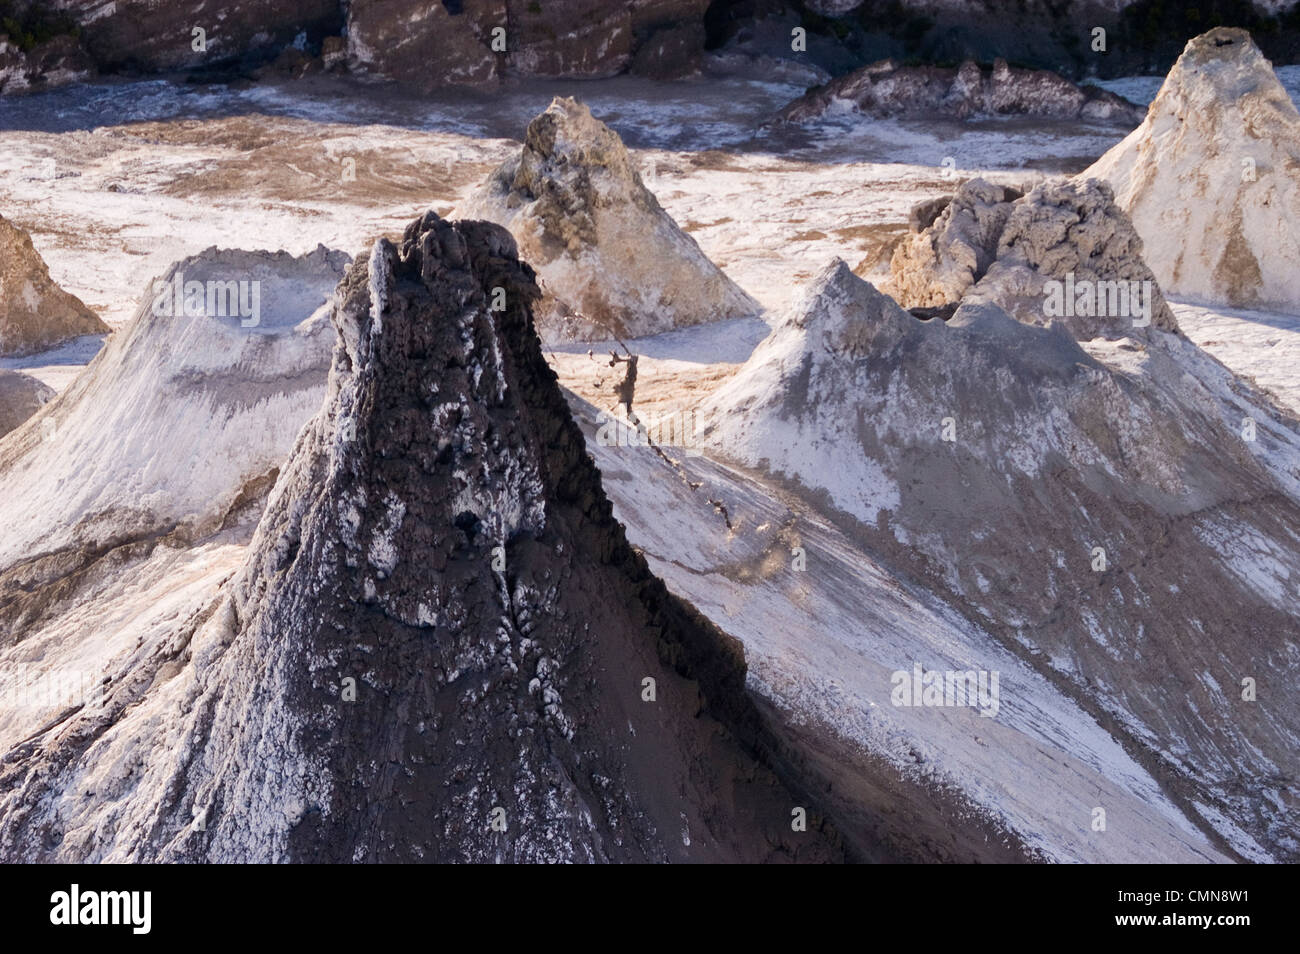 Aerial view of the overflowing crater of Ol Doinyo Lengai in Tanzania Stock Photo